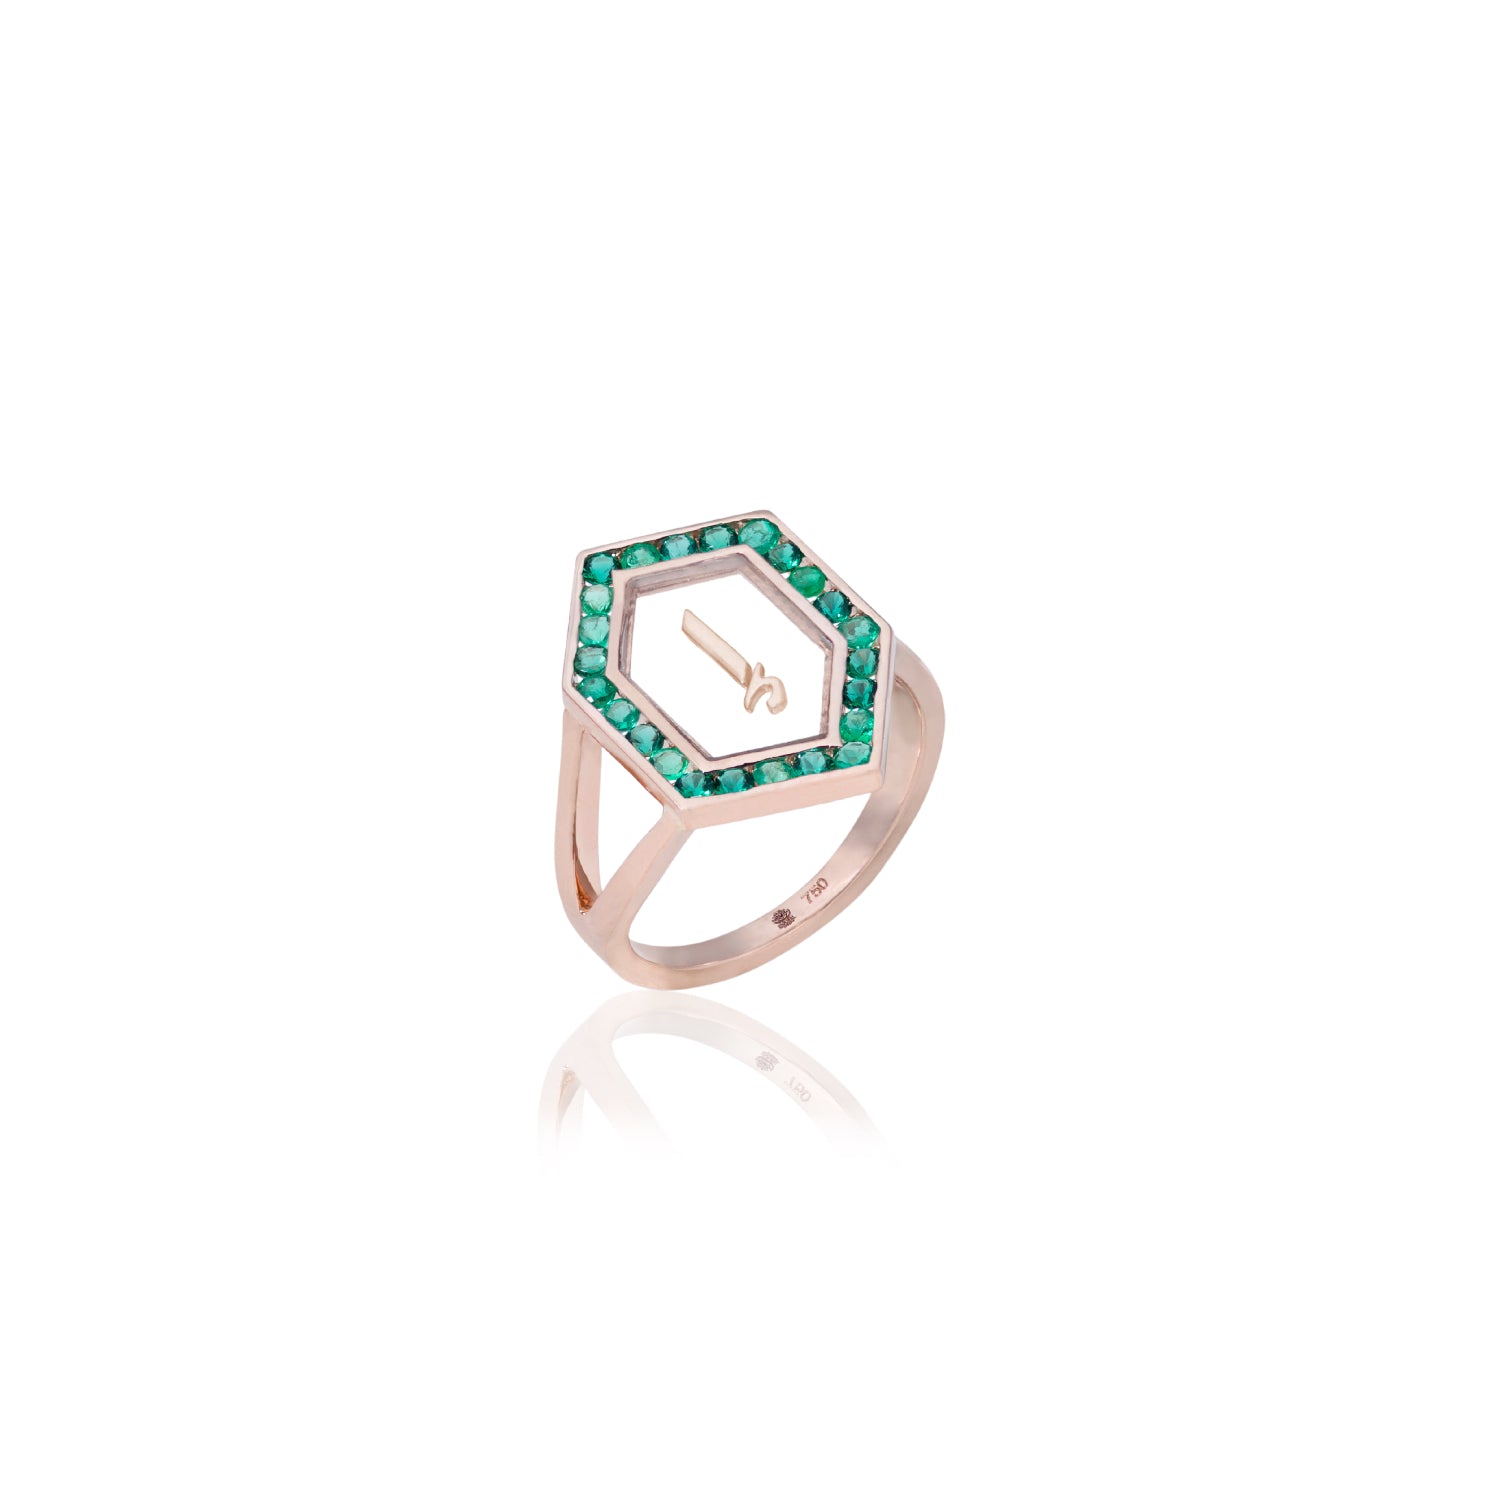 Qamoos 1.0 Letter إ Emerald Ring in Rose Gold